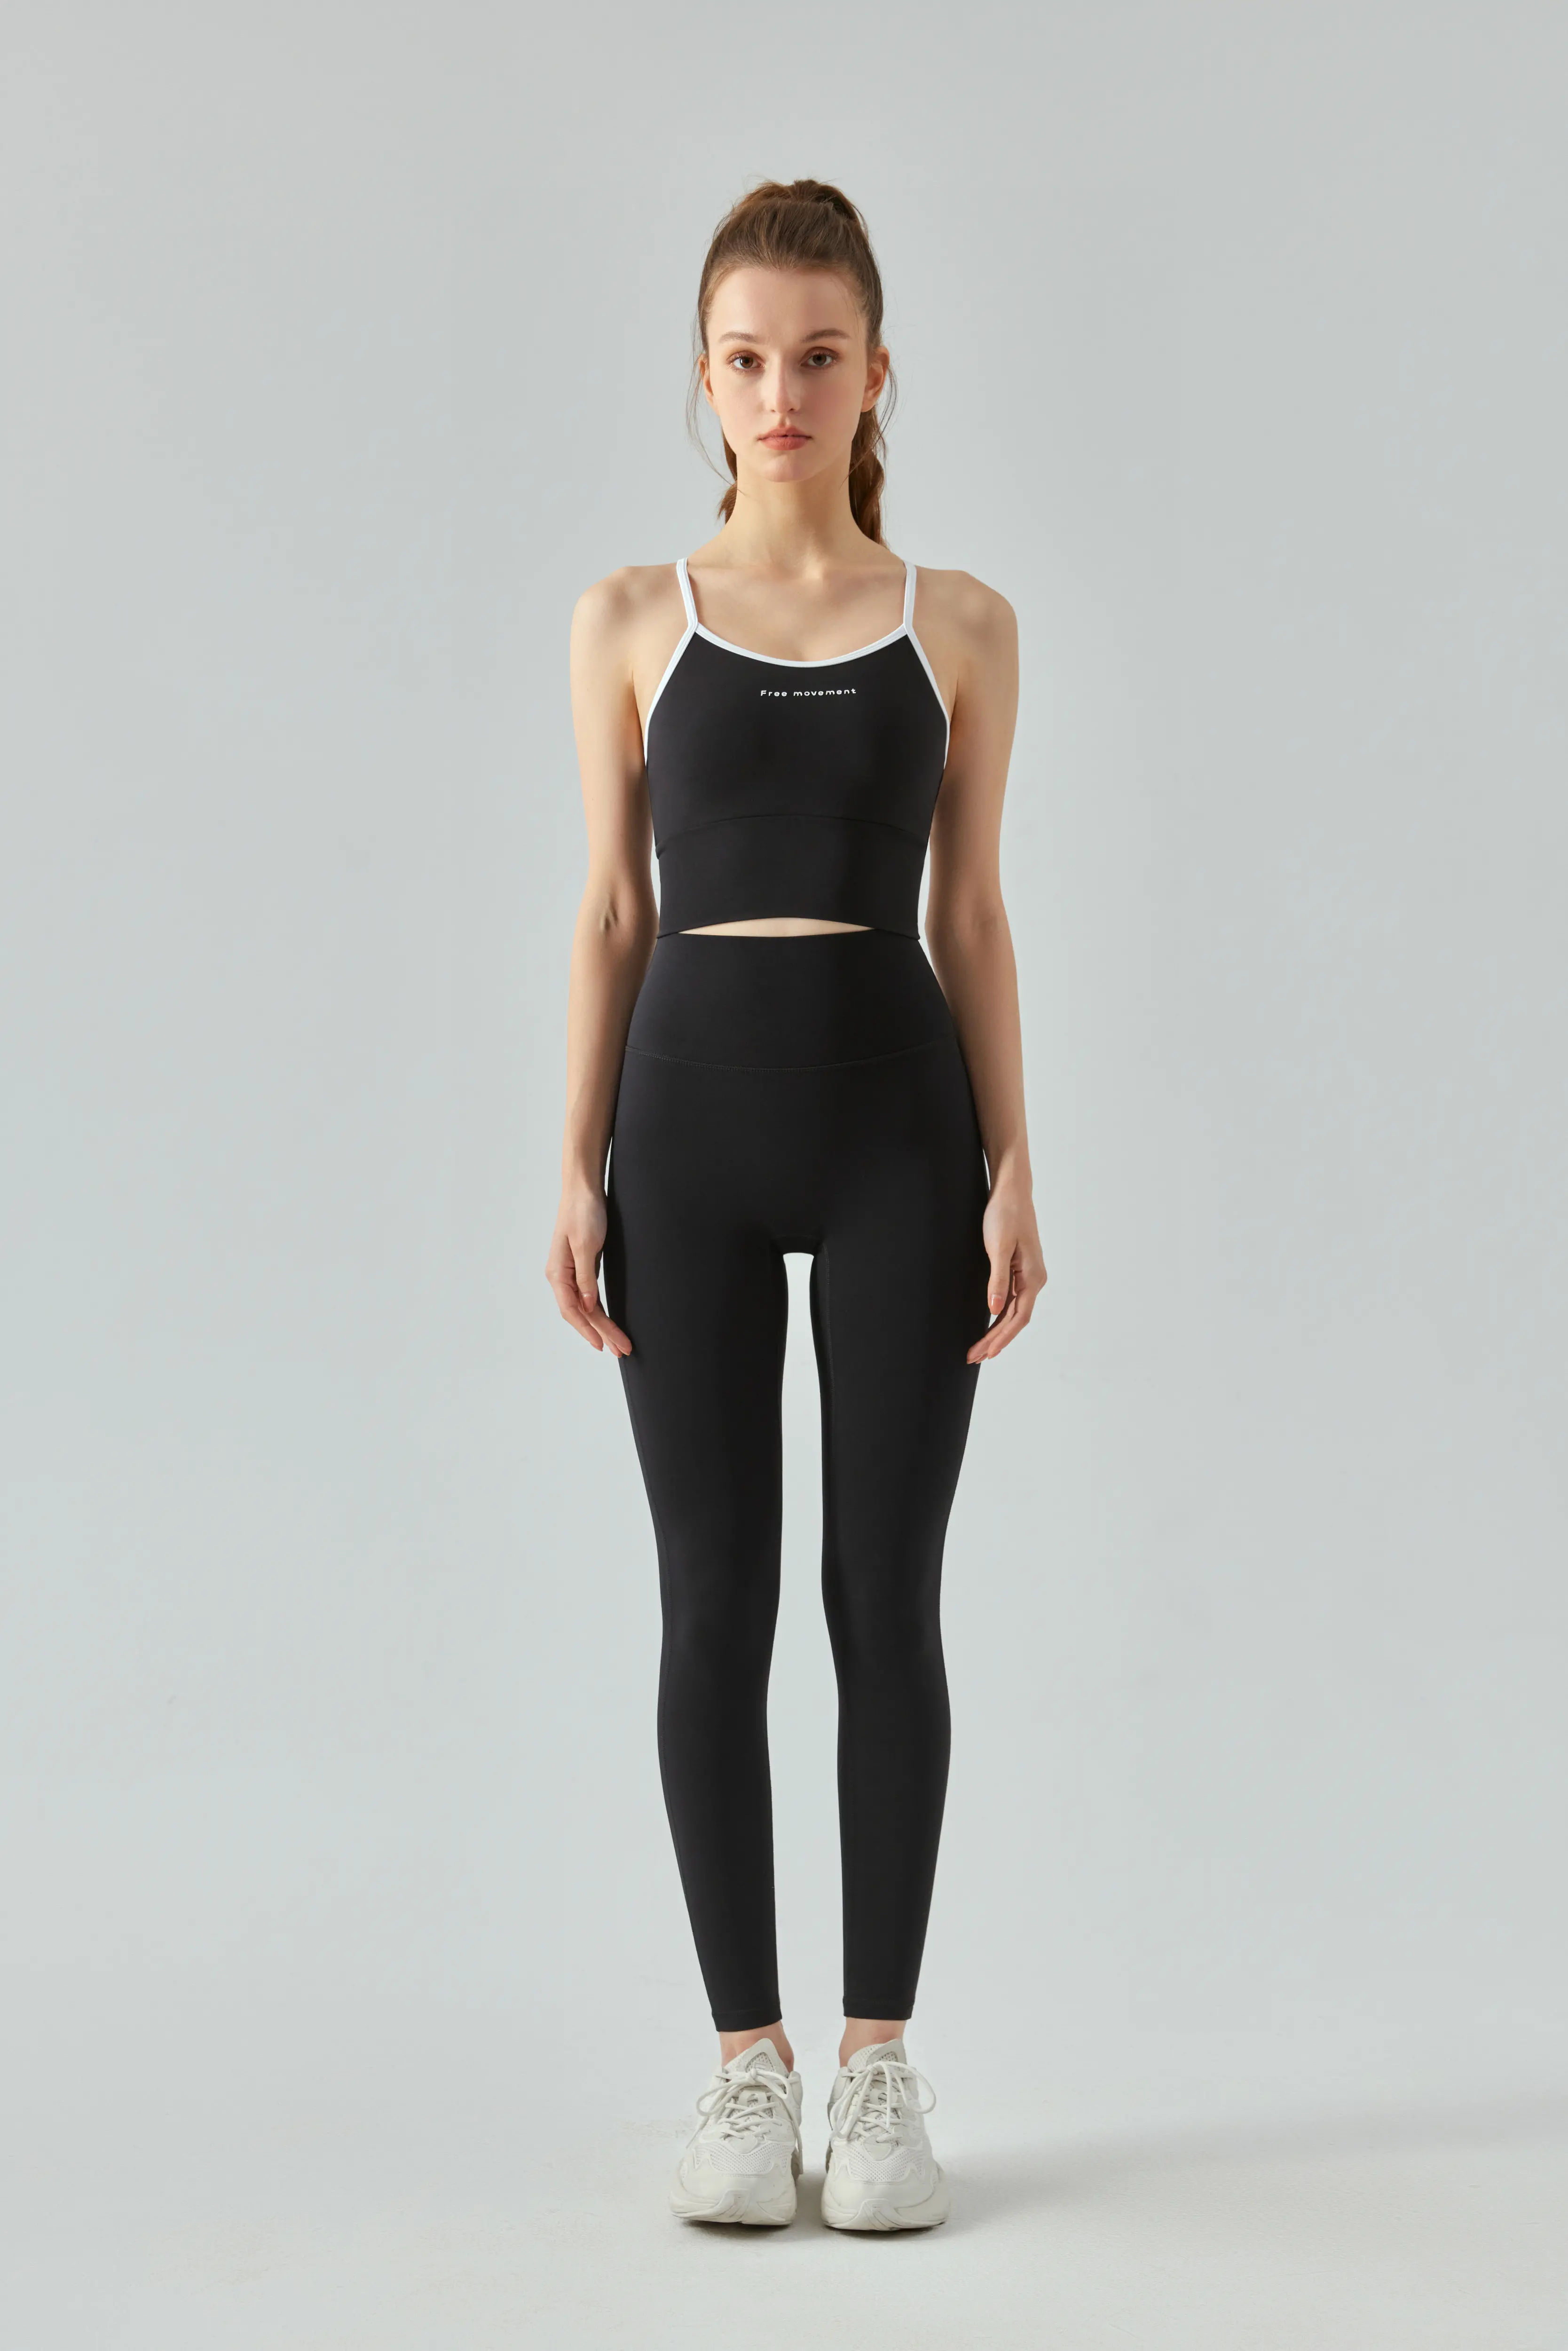 Cross-Strap Yoga Top with Thin Straps & Removable Padding